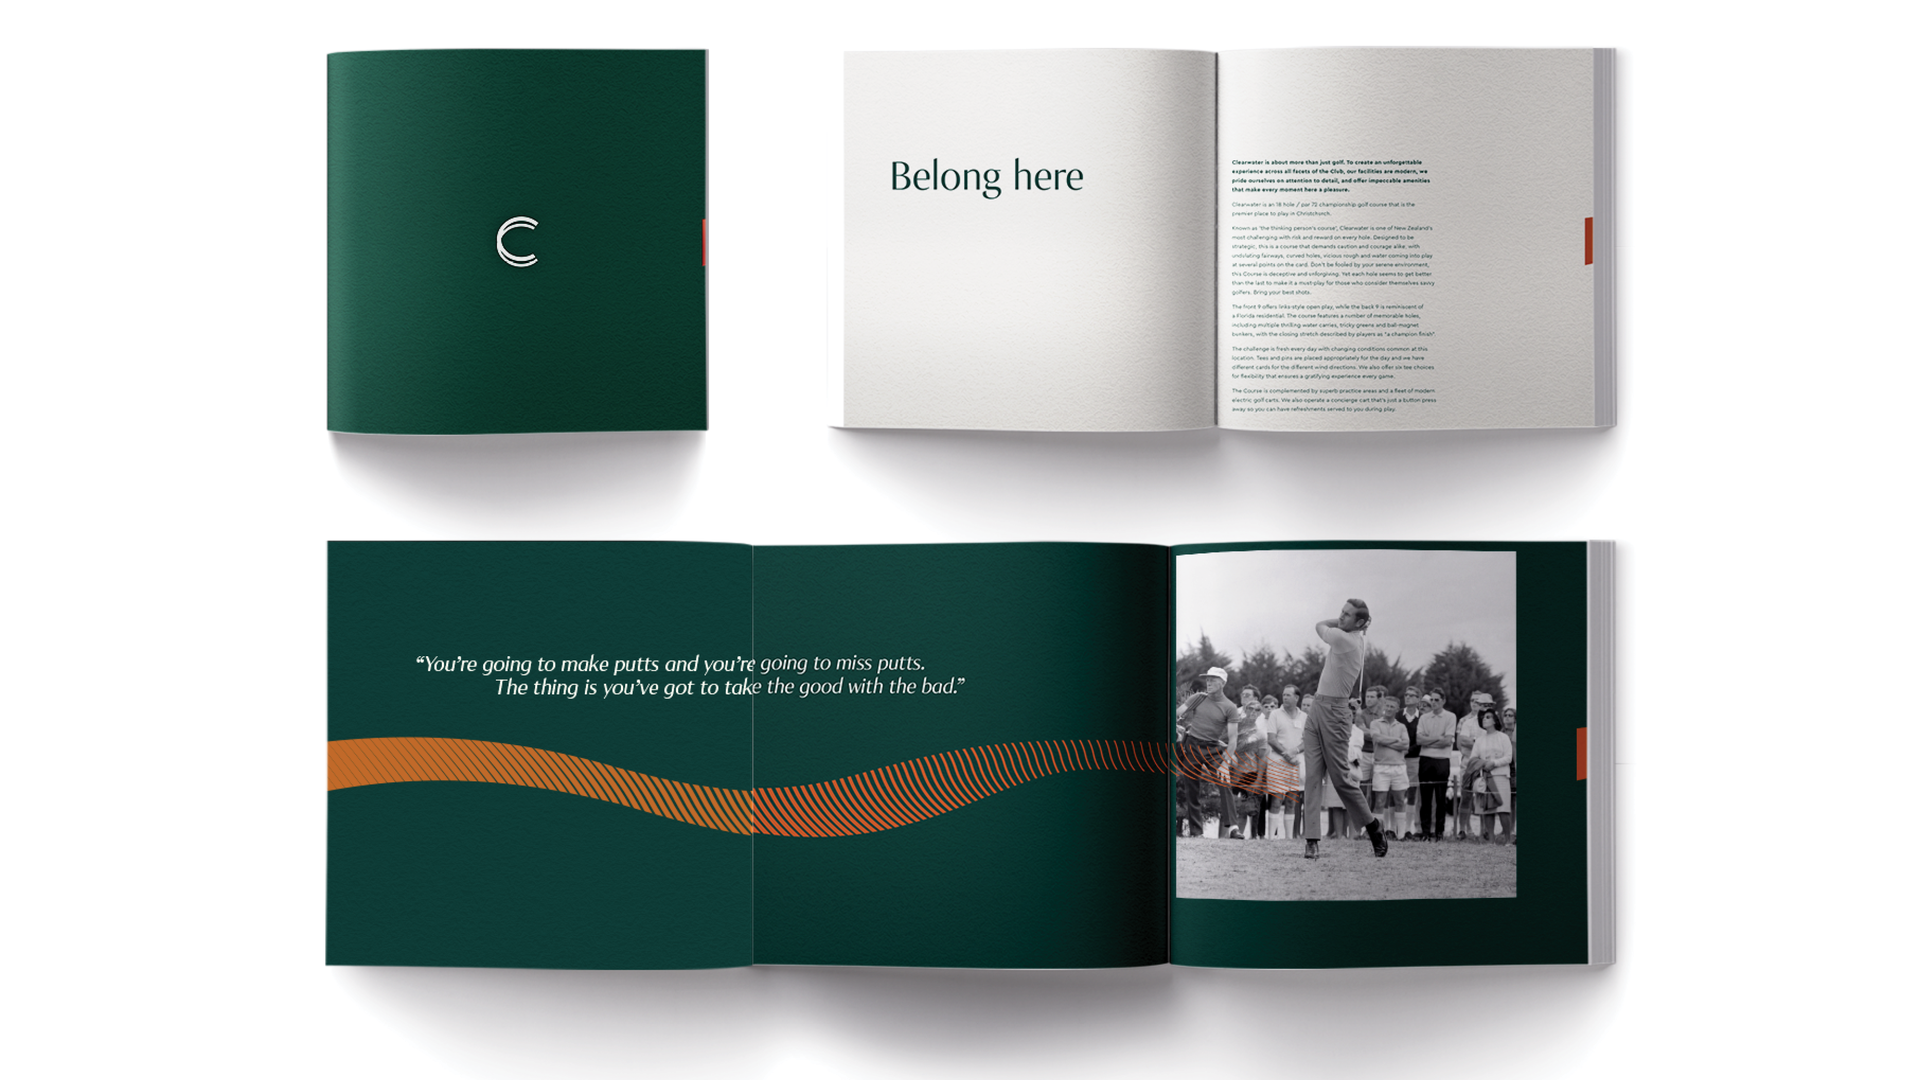 Concept of a Clearwater Golf branded booklet